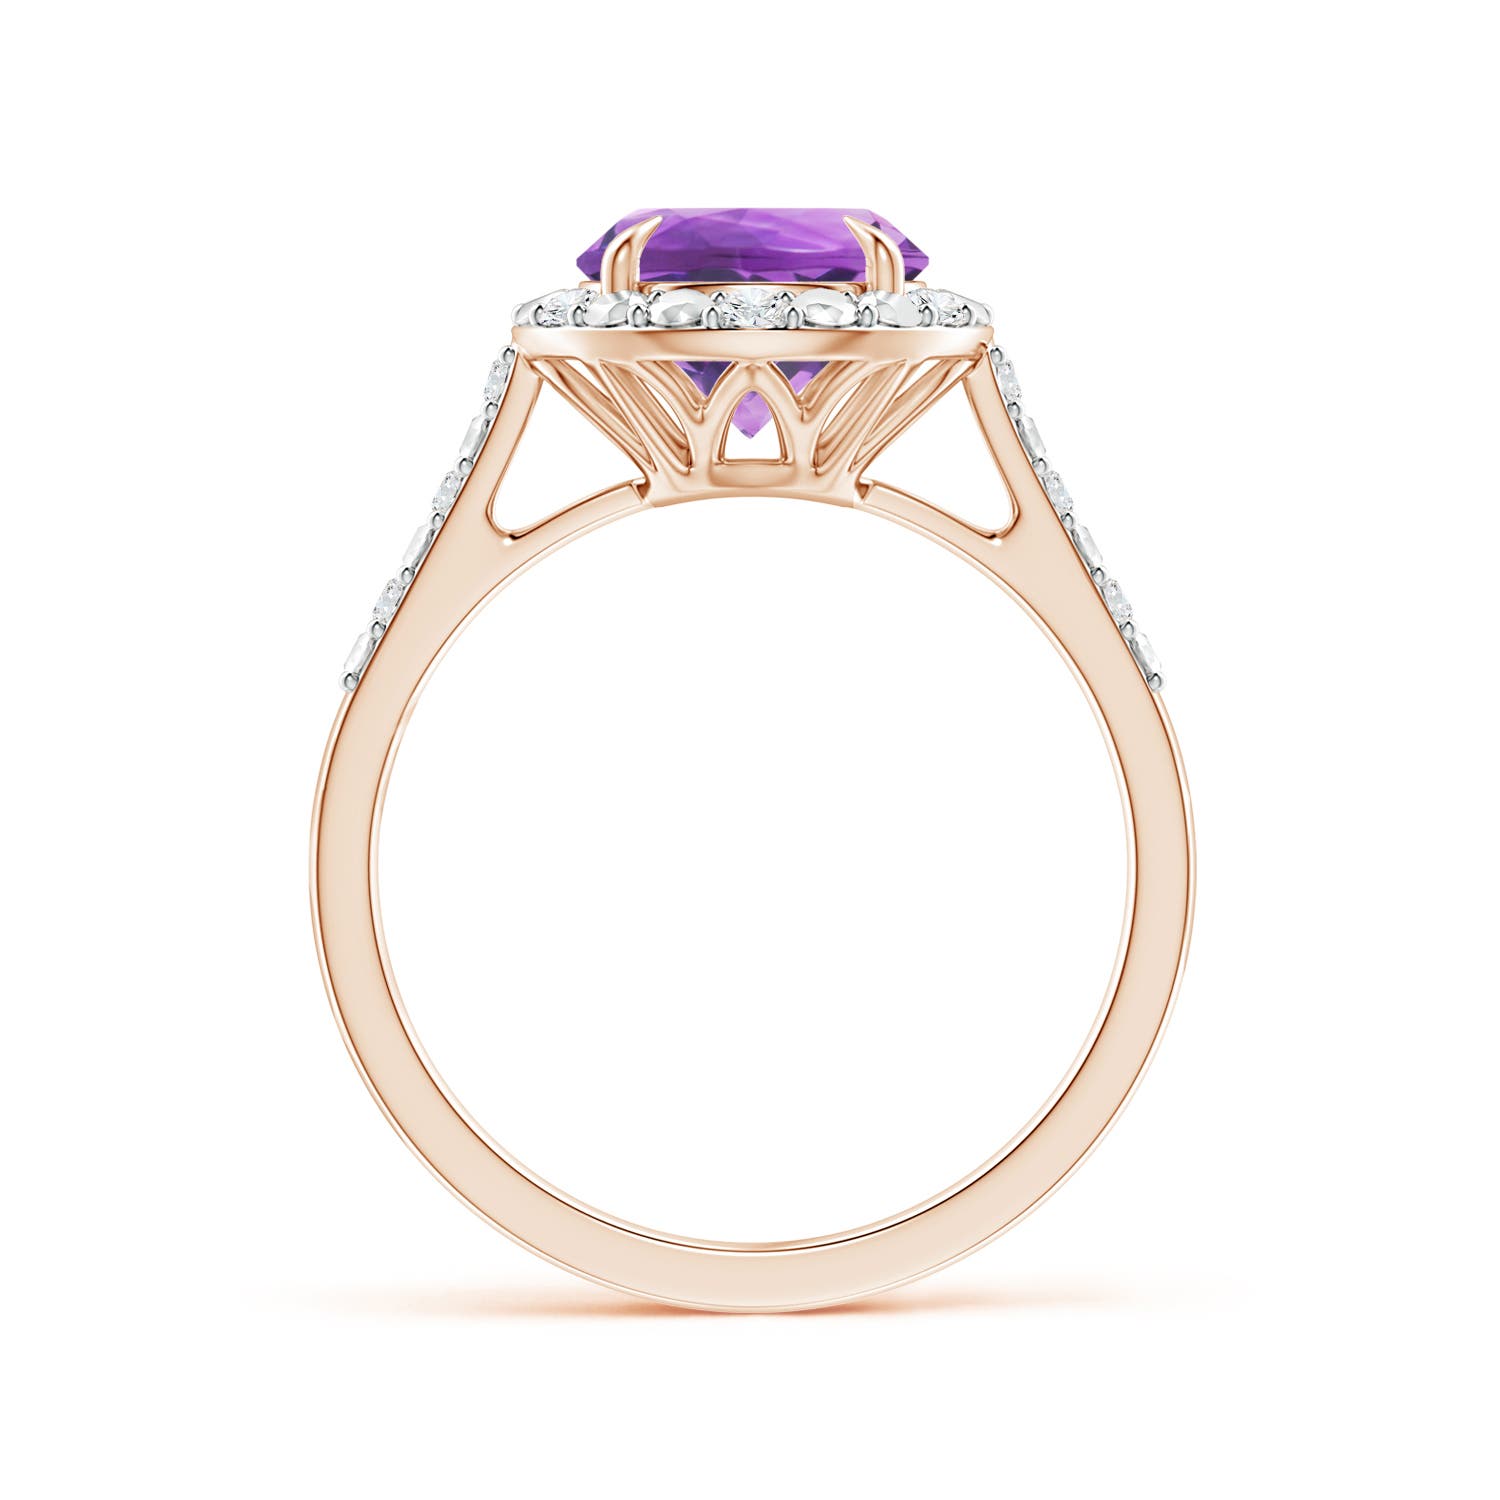 AA - Amethyst / 1.82 CT / 14 KT Rose Gold